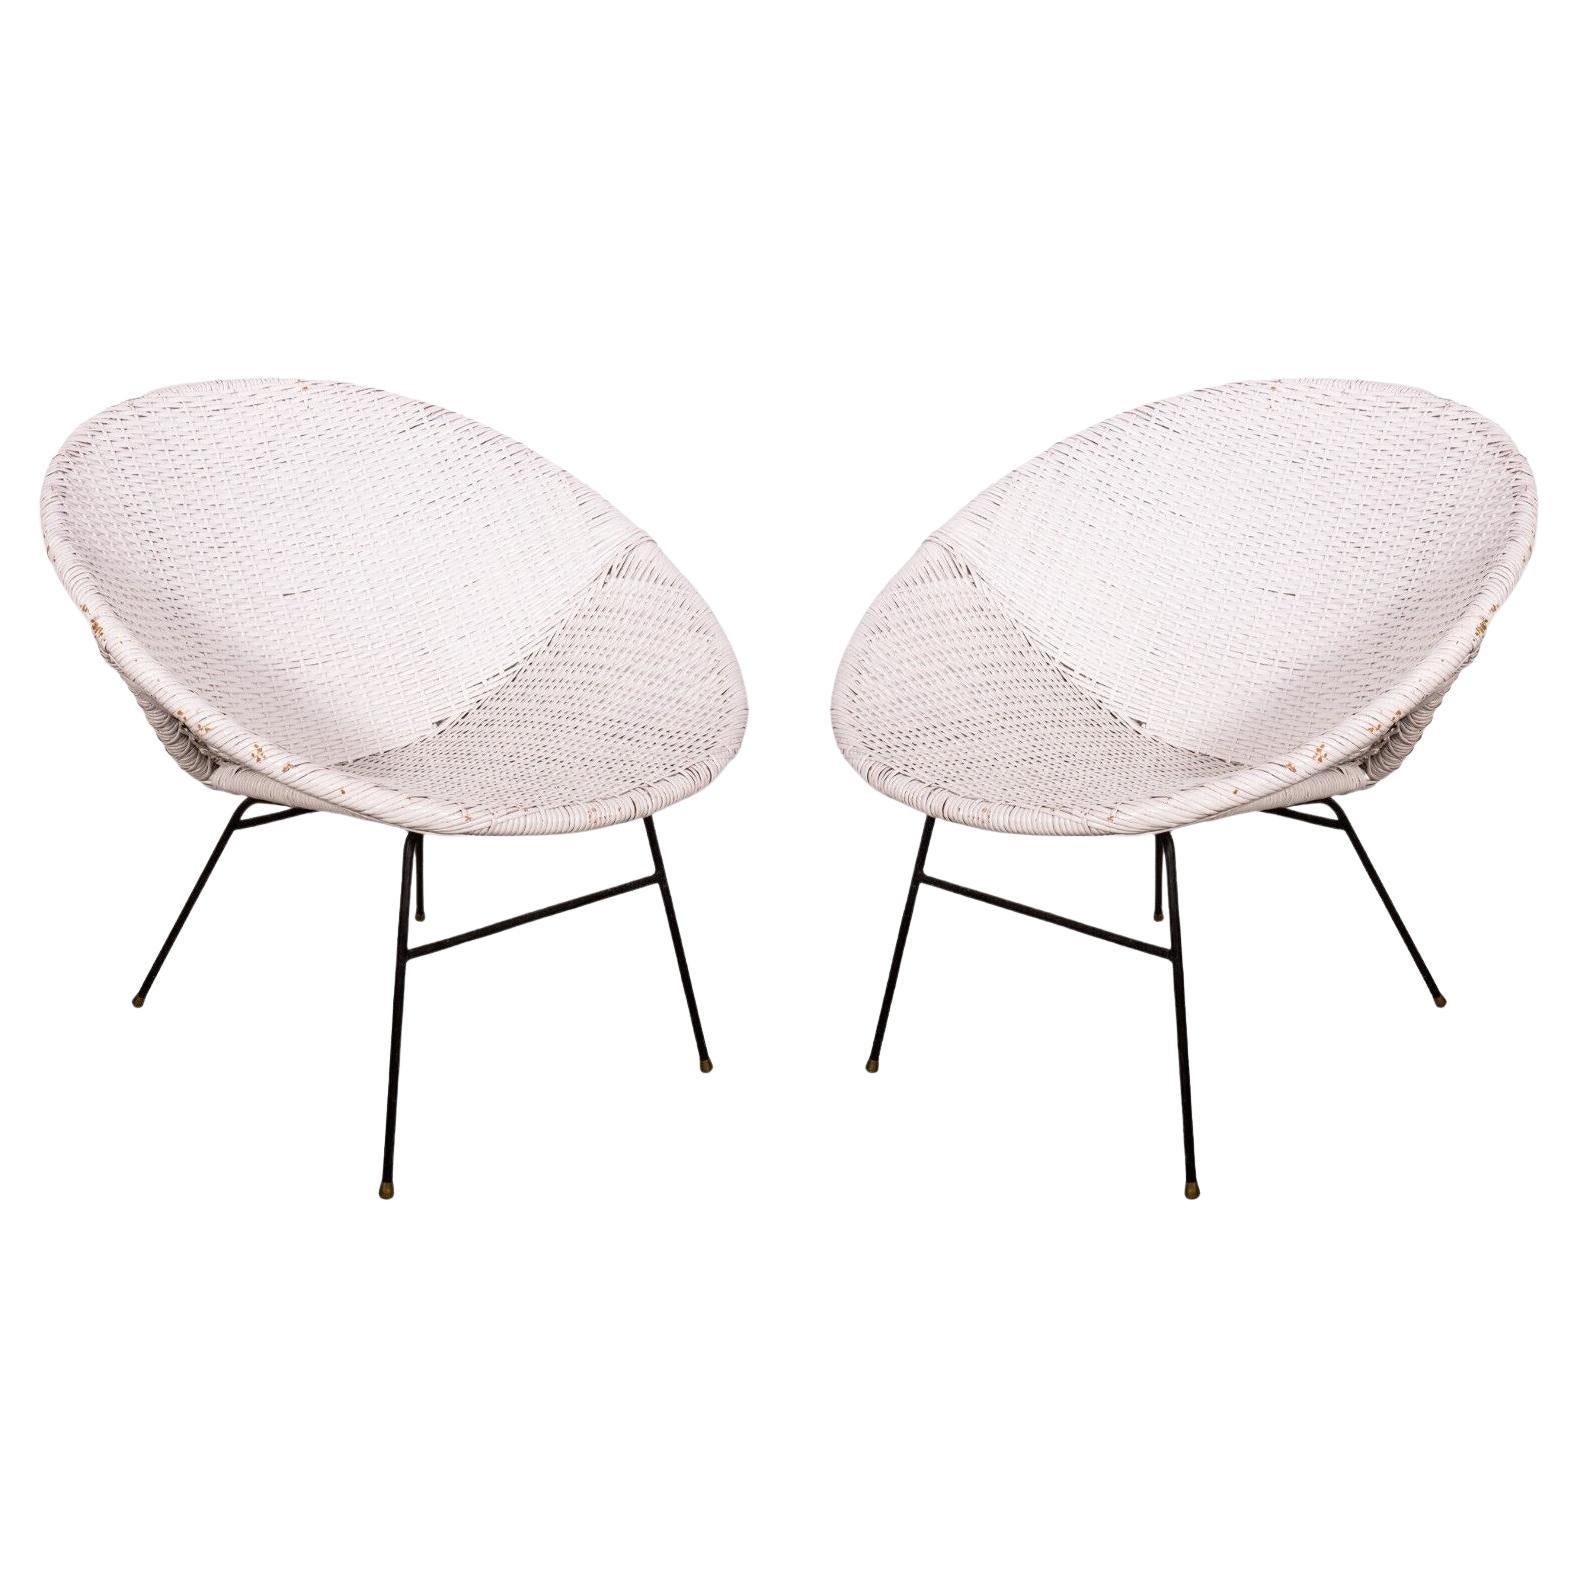 Mid-Century Modern Pair of White Scoop Rattan Chairs For Sale